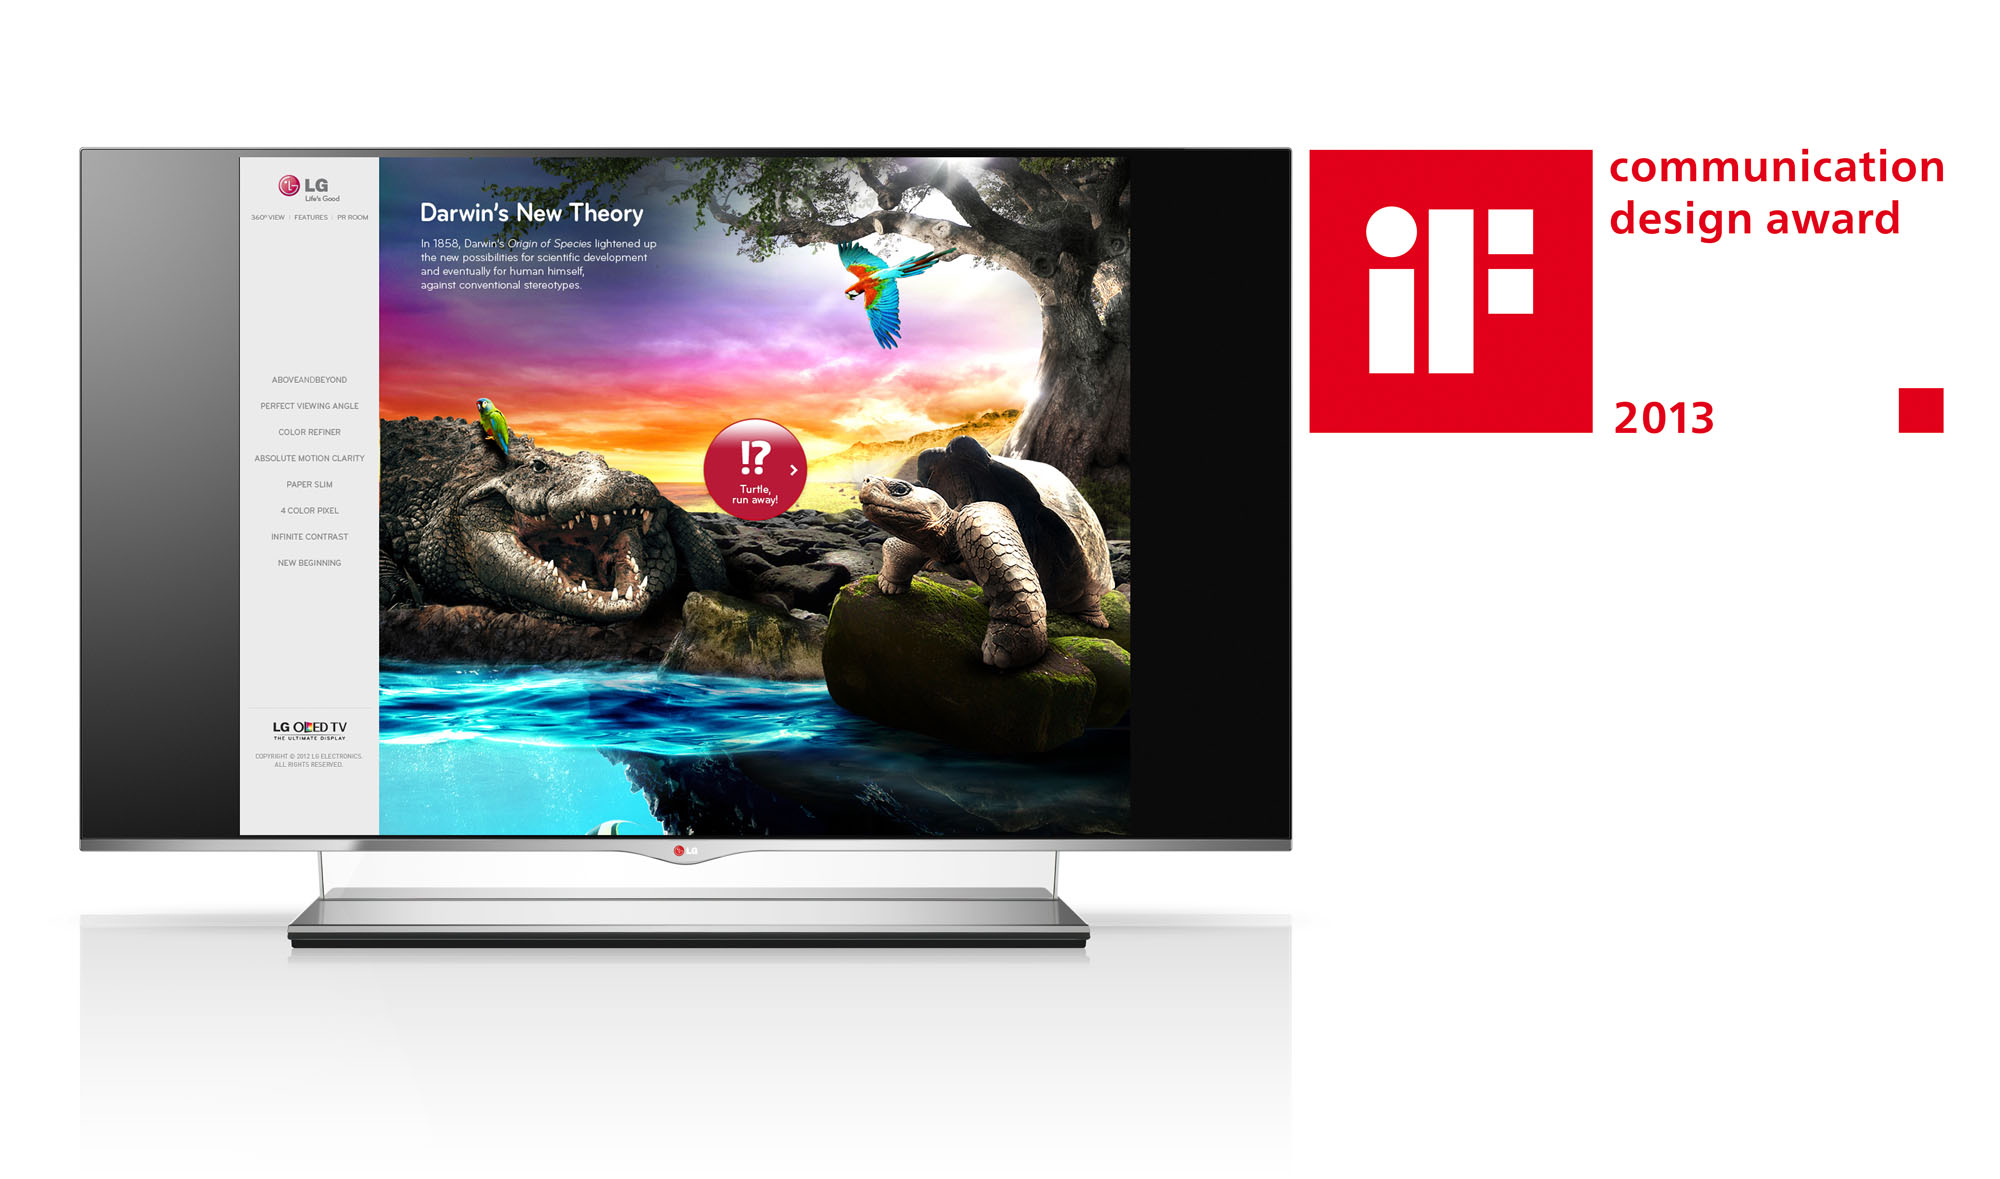 LG OLED TV displaying its microsite with the 2013 iF Design Award logo on the right